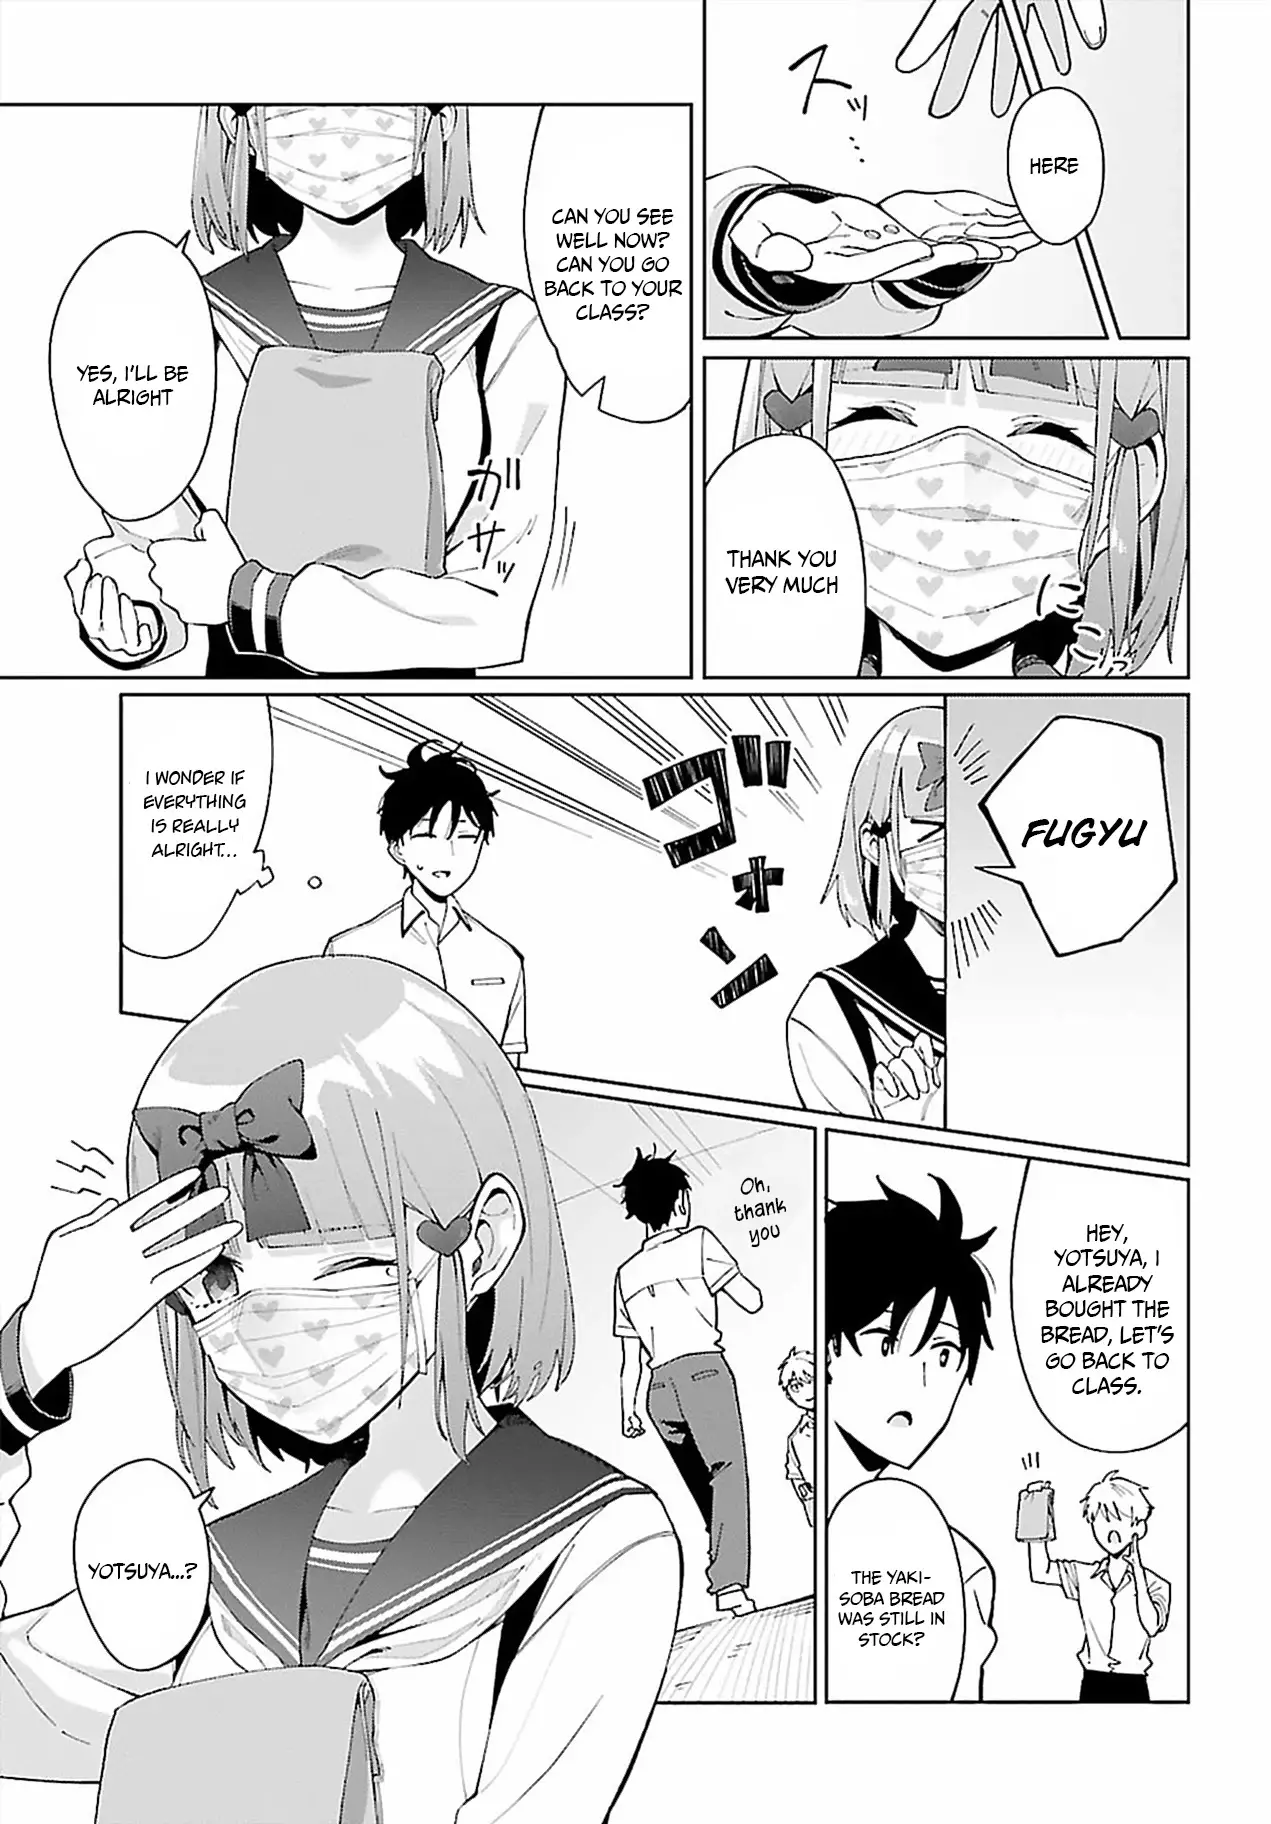 I Don't Understand Shirogane-San's Facial Expression At All - 6 page 16